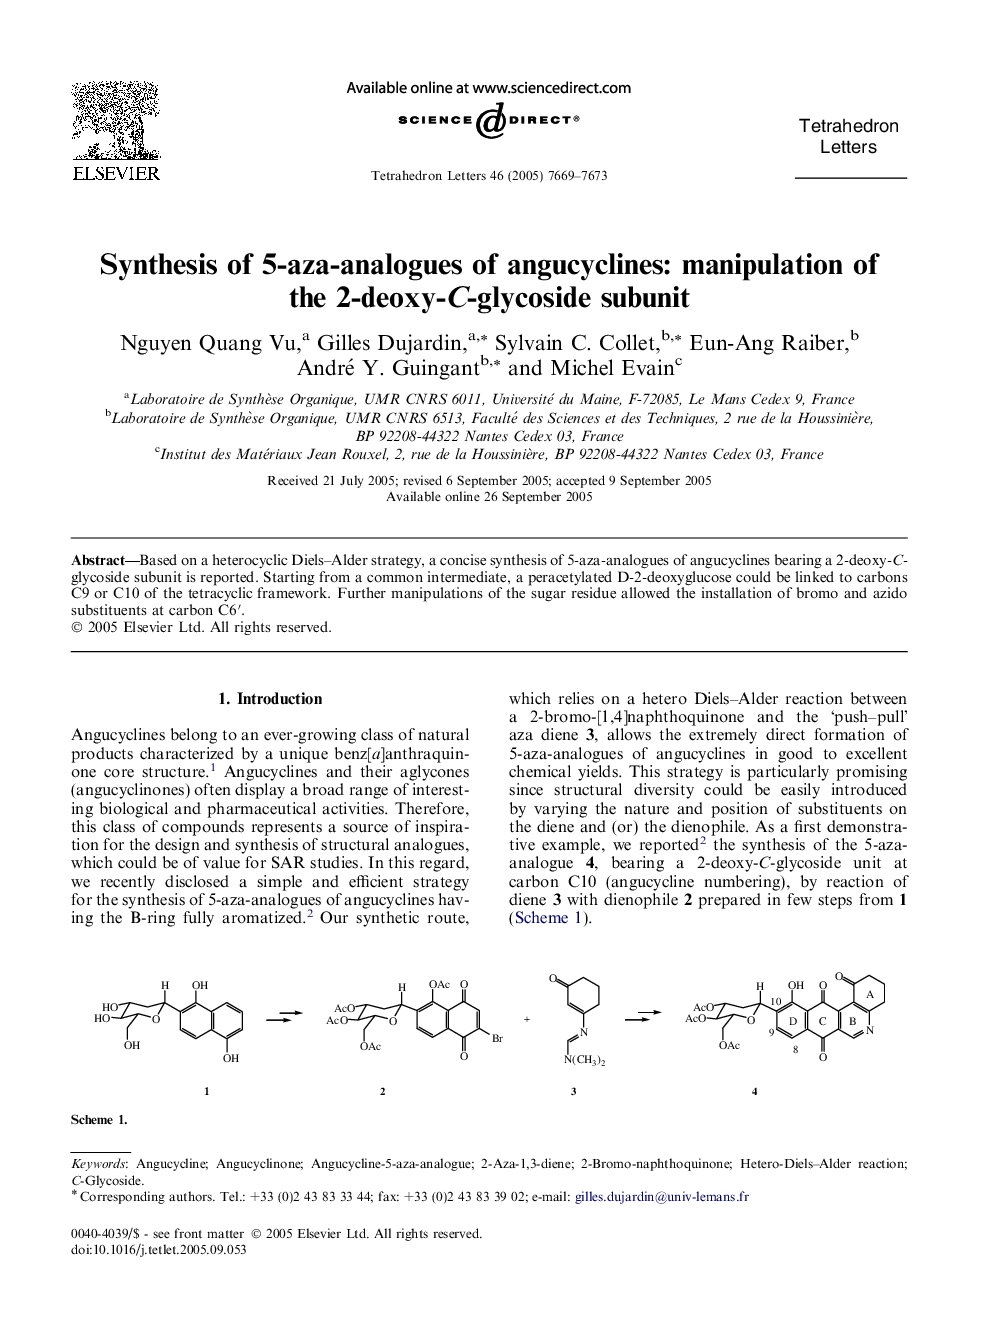 Synthesis of 5-aza-analogues of angucyclines: manipulation of the 2-deoxy-C-glycoside subunit